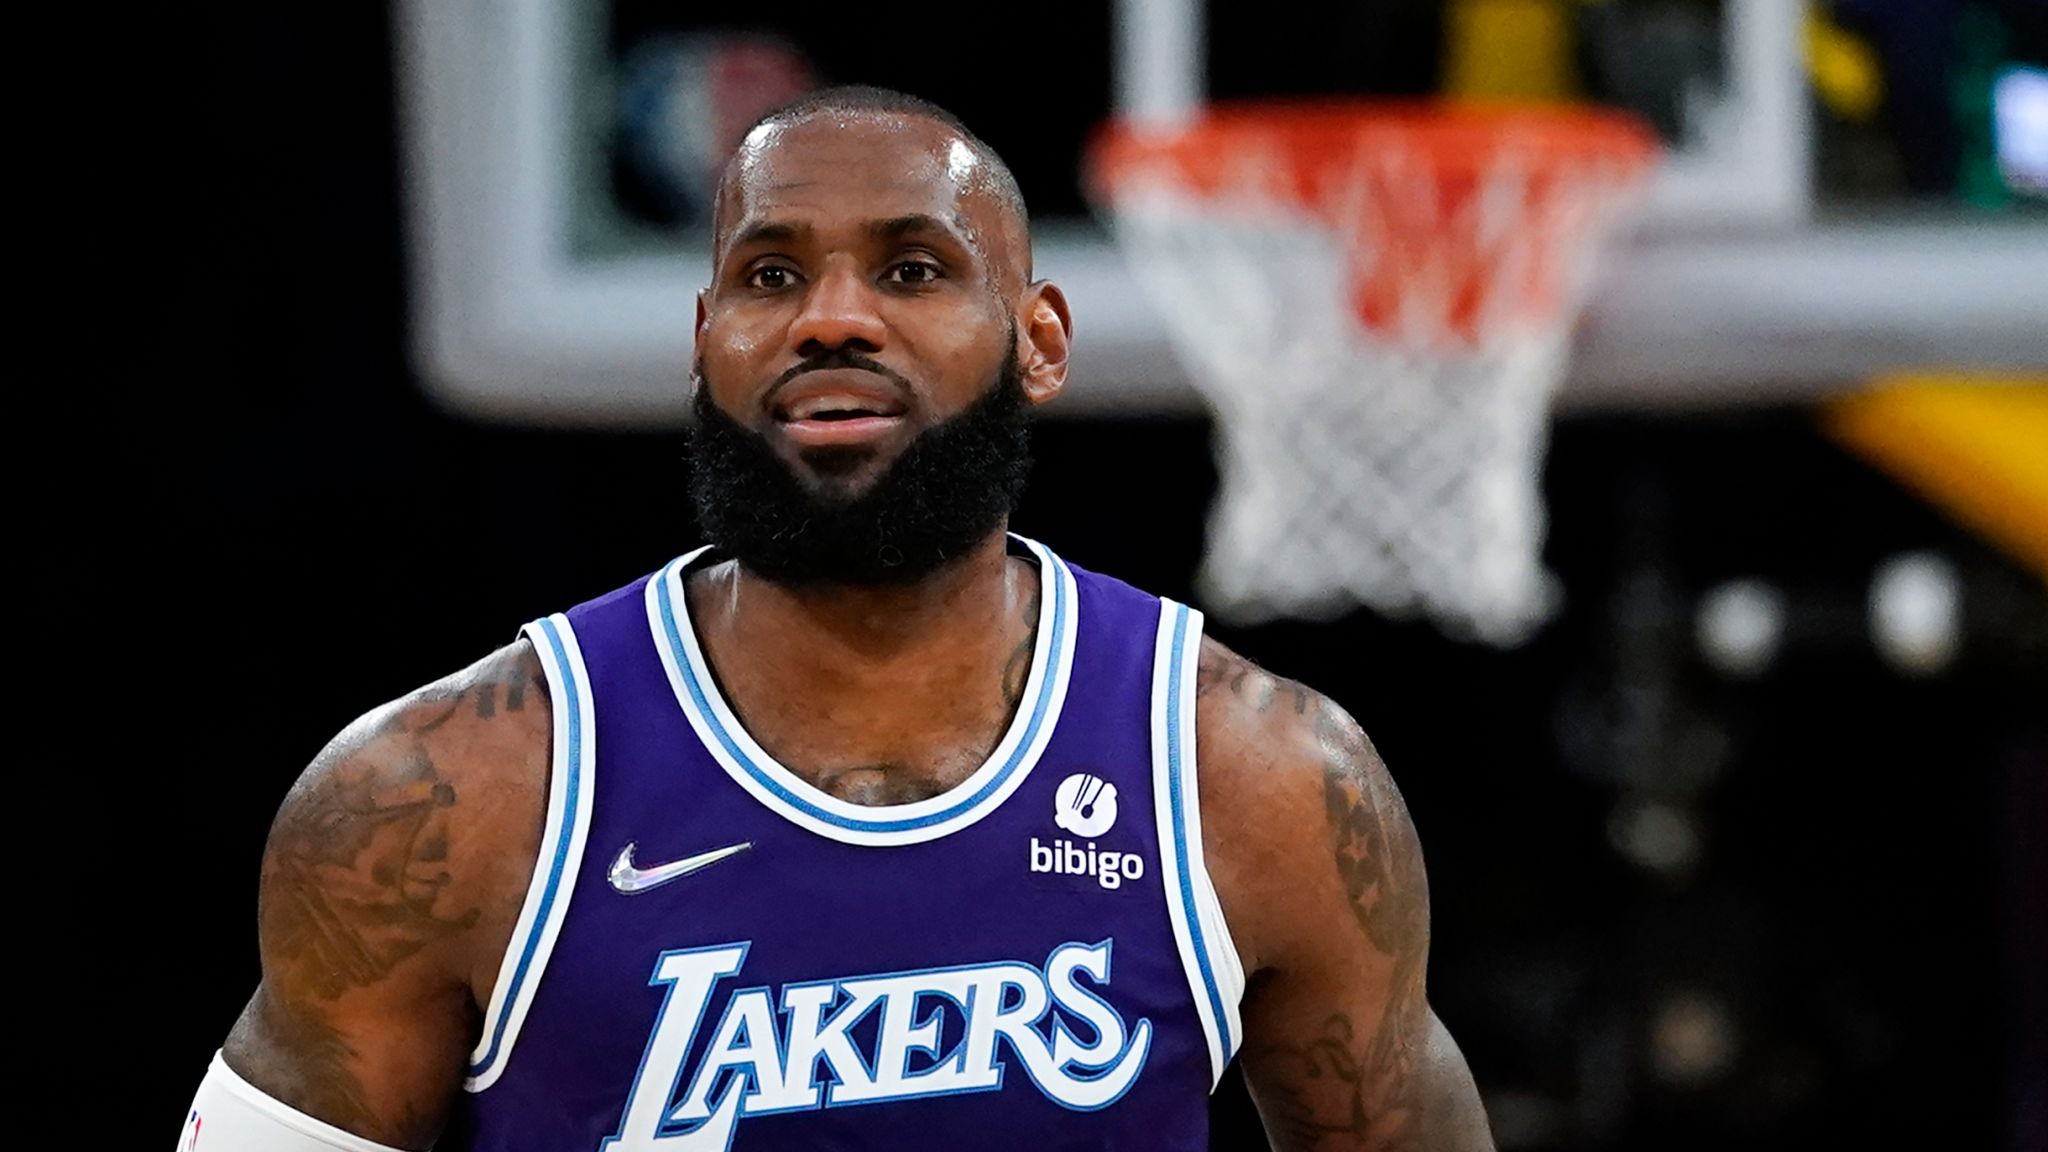 NBA: LeBron agrees to 4-year deal with Lakers